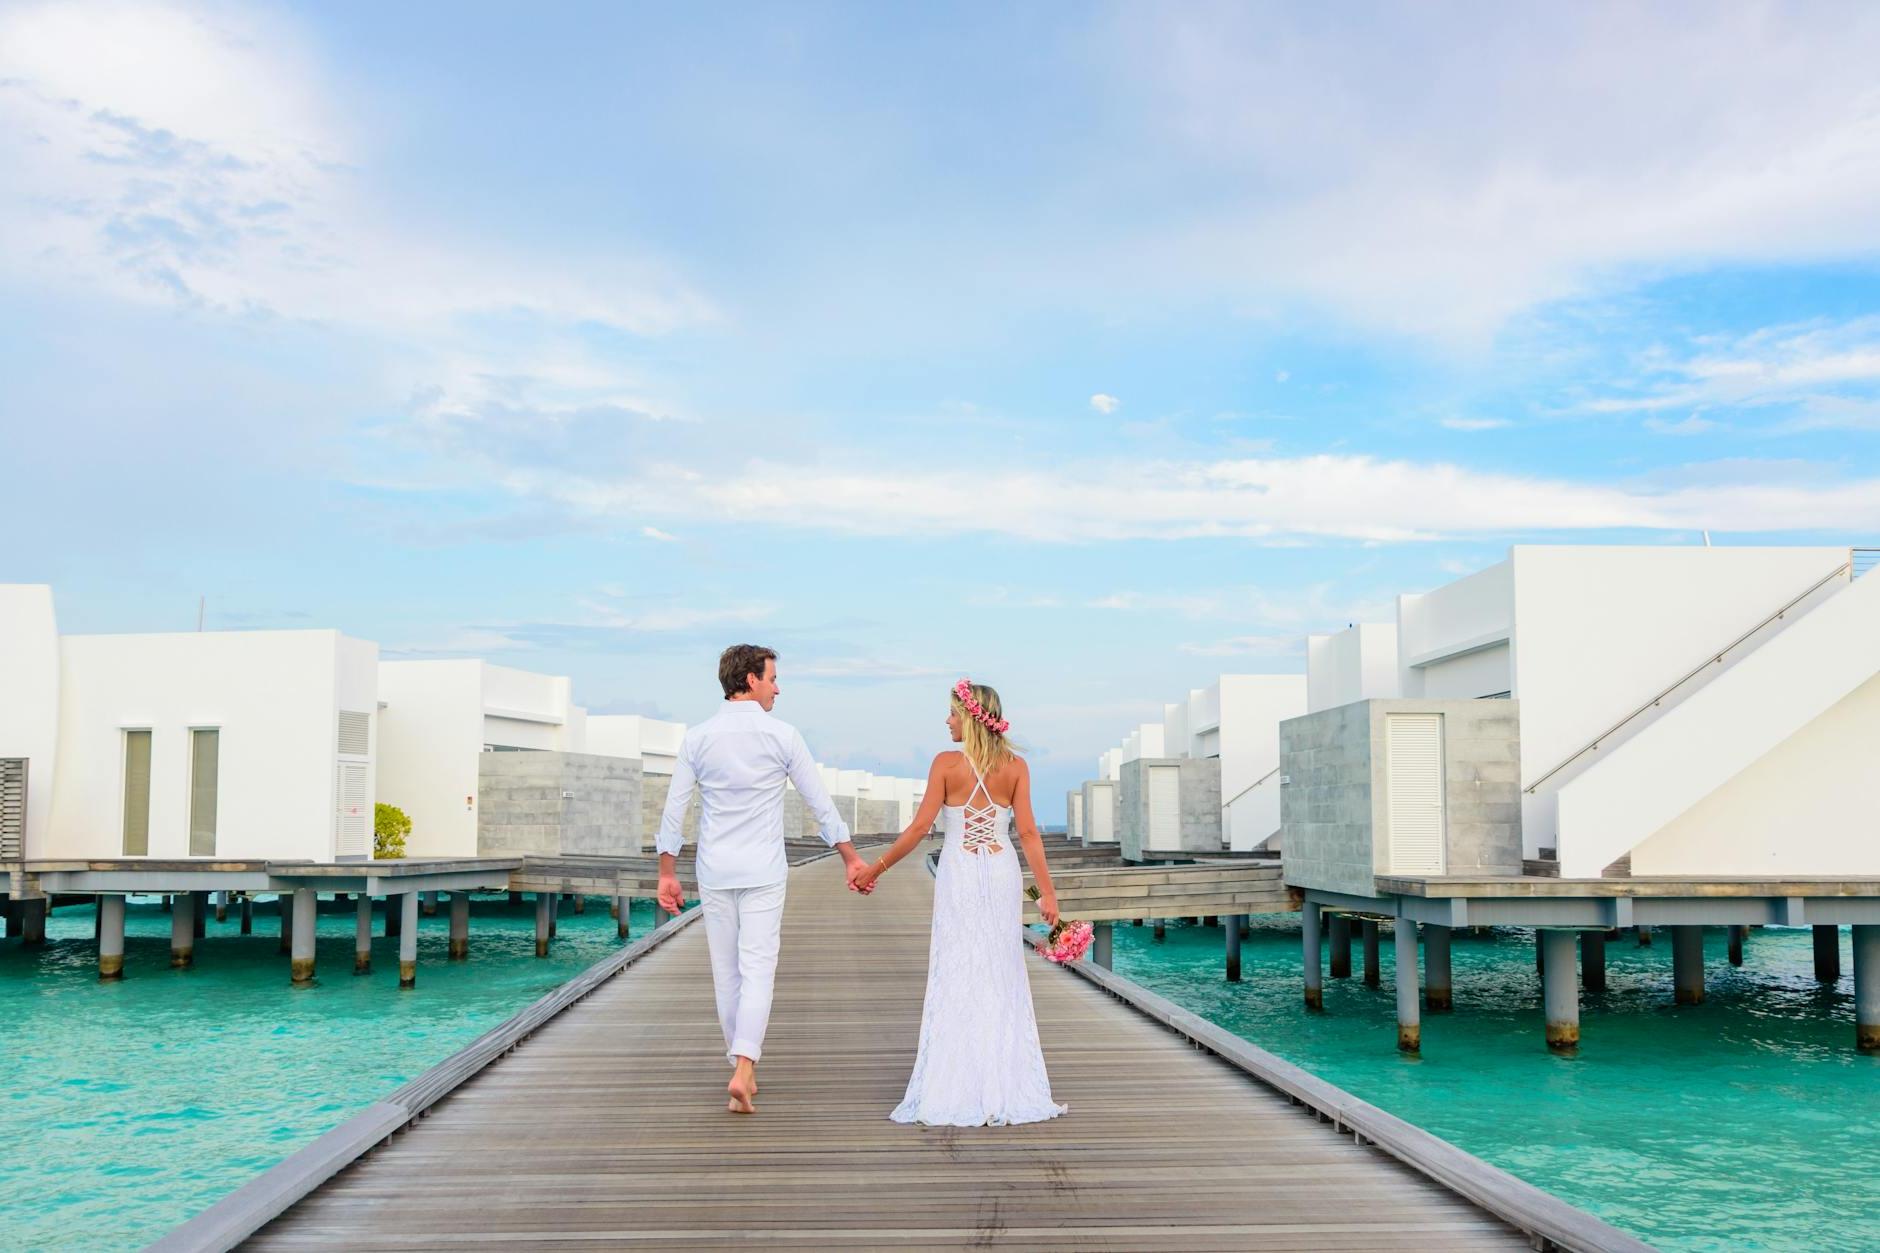 Full body back view of unrecognizable loving couple in white clothes walking on boardwalk above water near buildings while holding hands and looking at each other